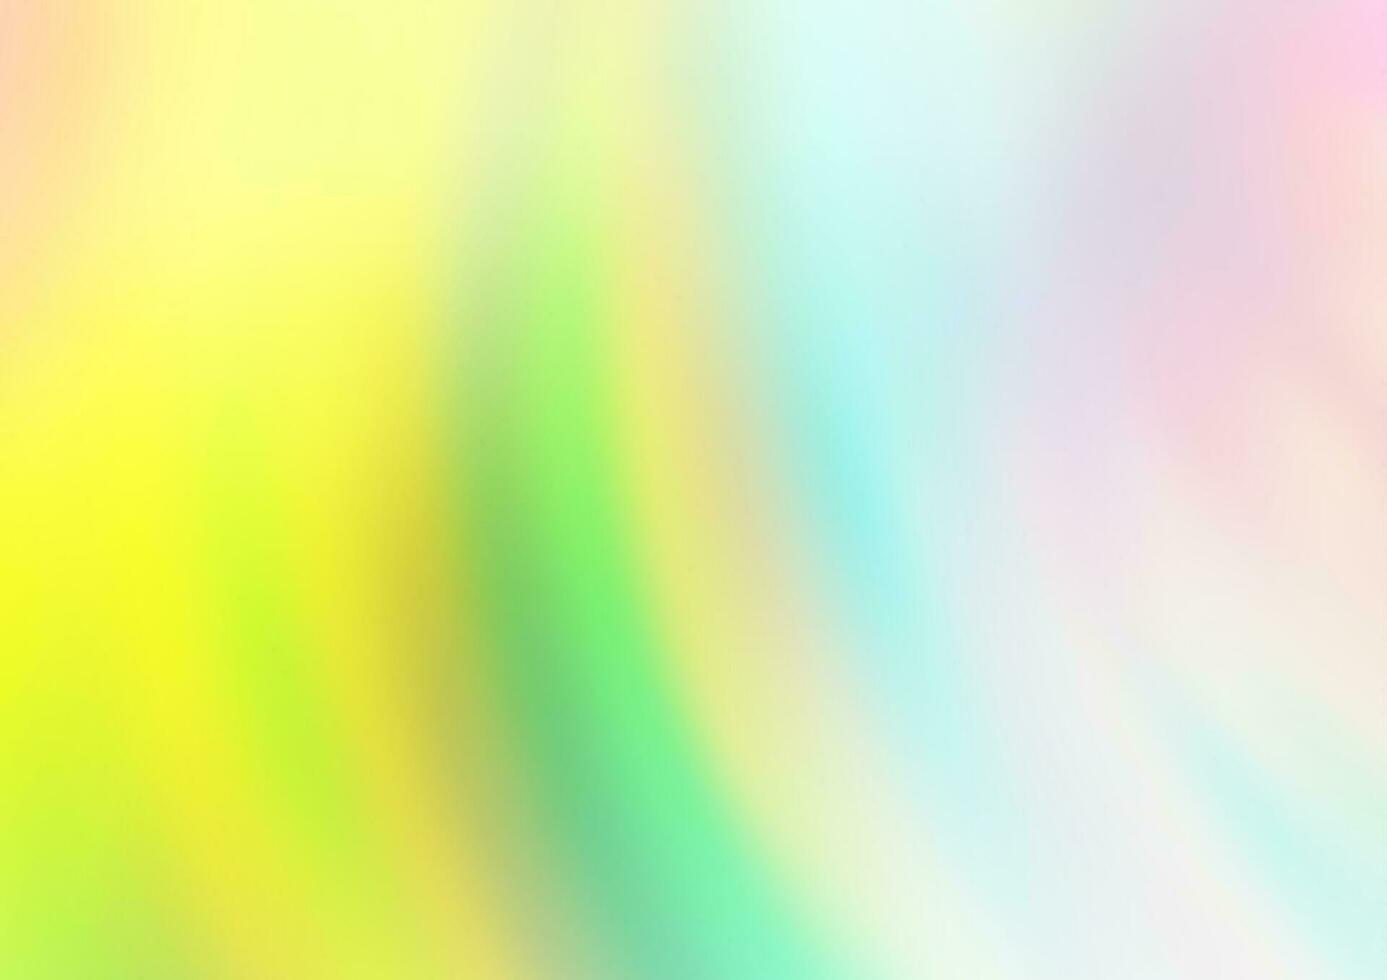 Light Multicolor, Rainbow vector background with liquid shapes.